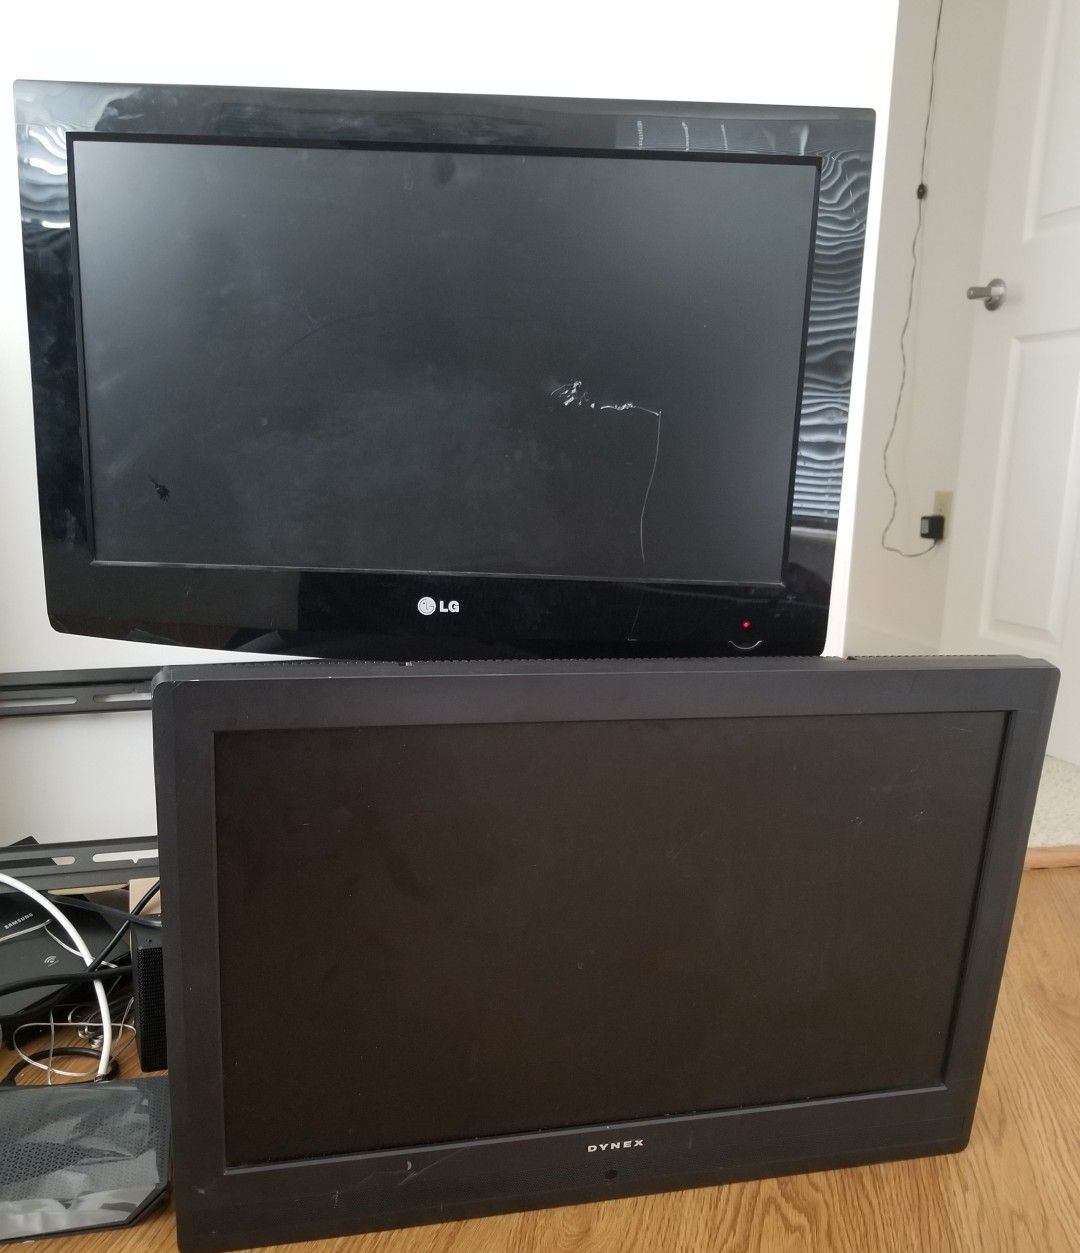 LG 32" and Dynex flat screen tv for regular or computer use